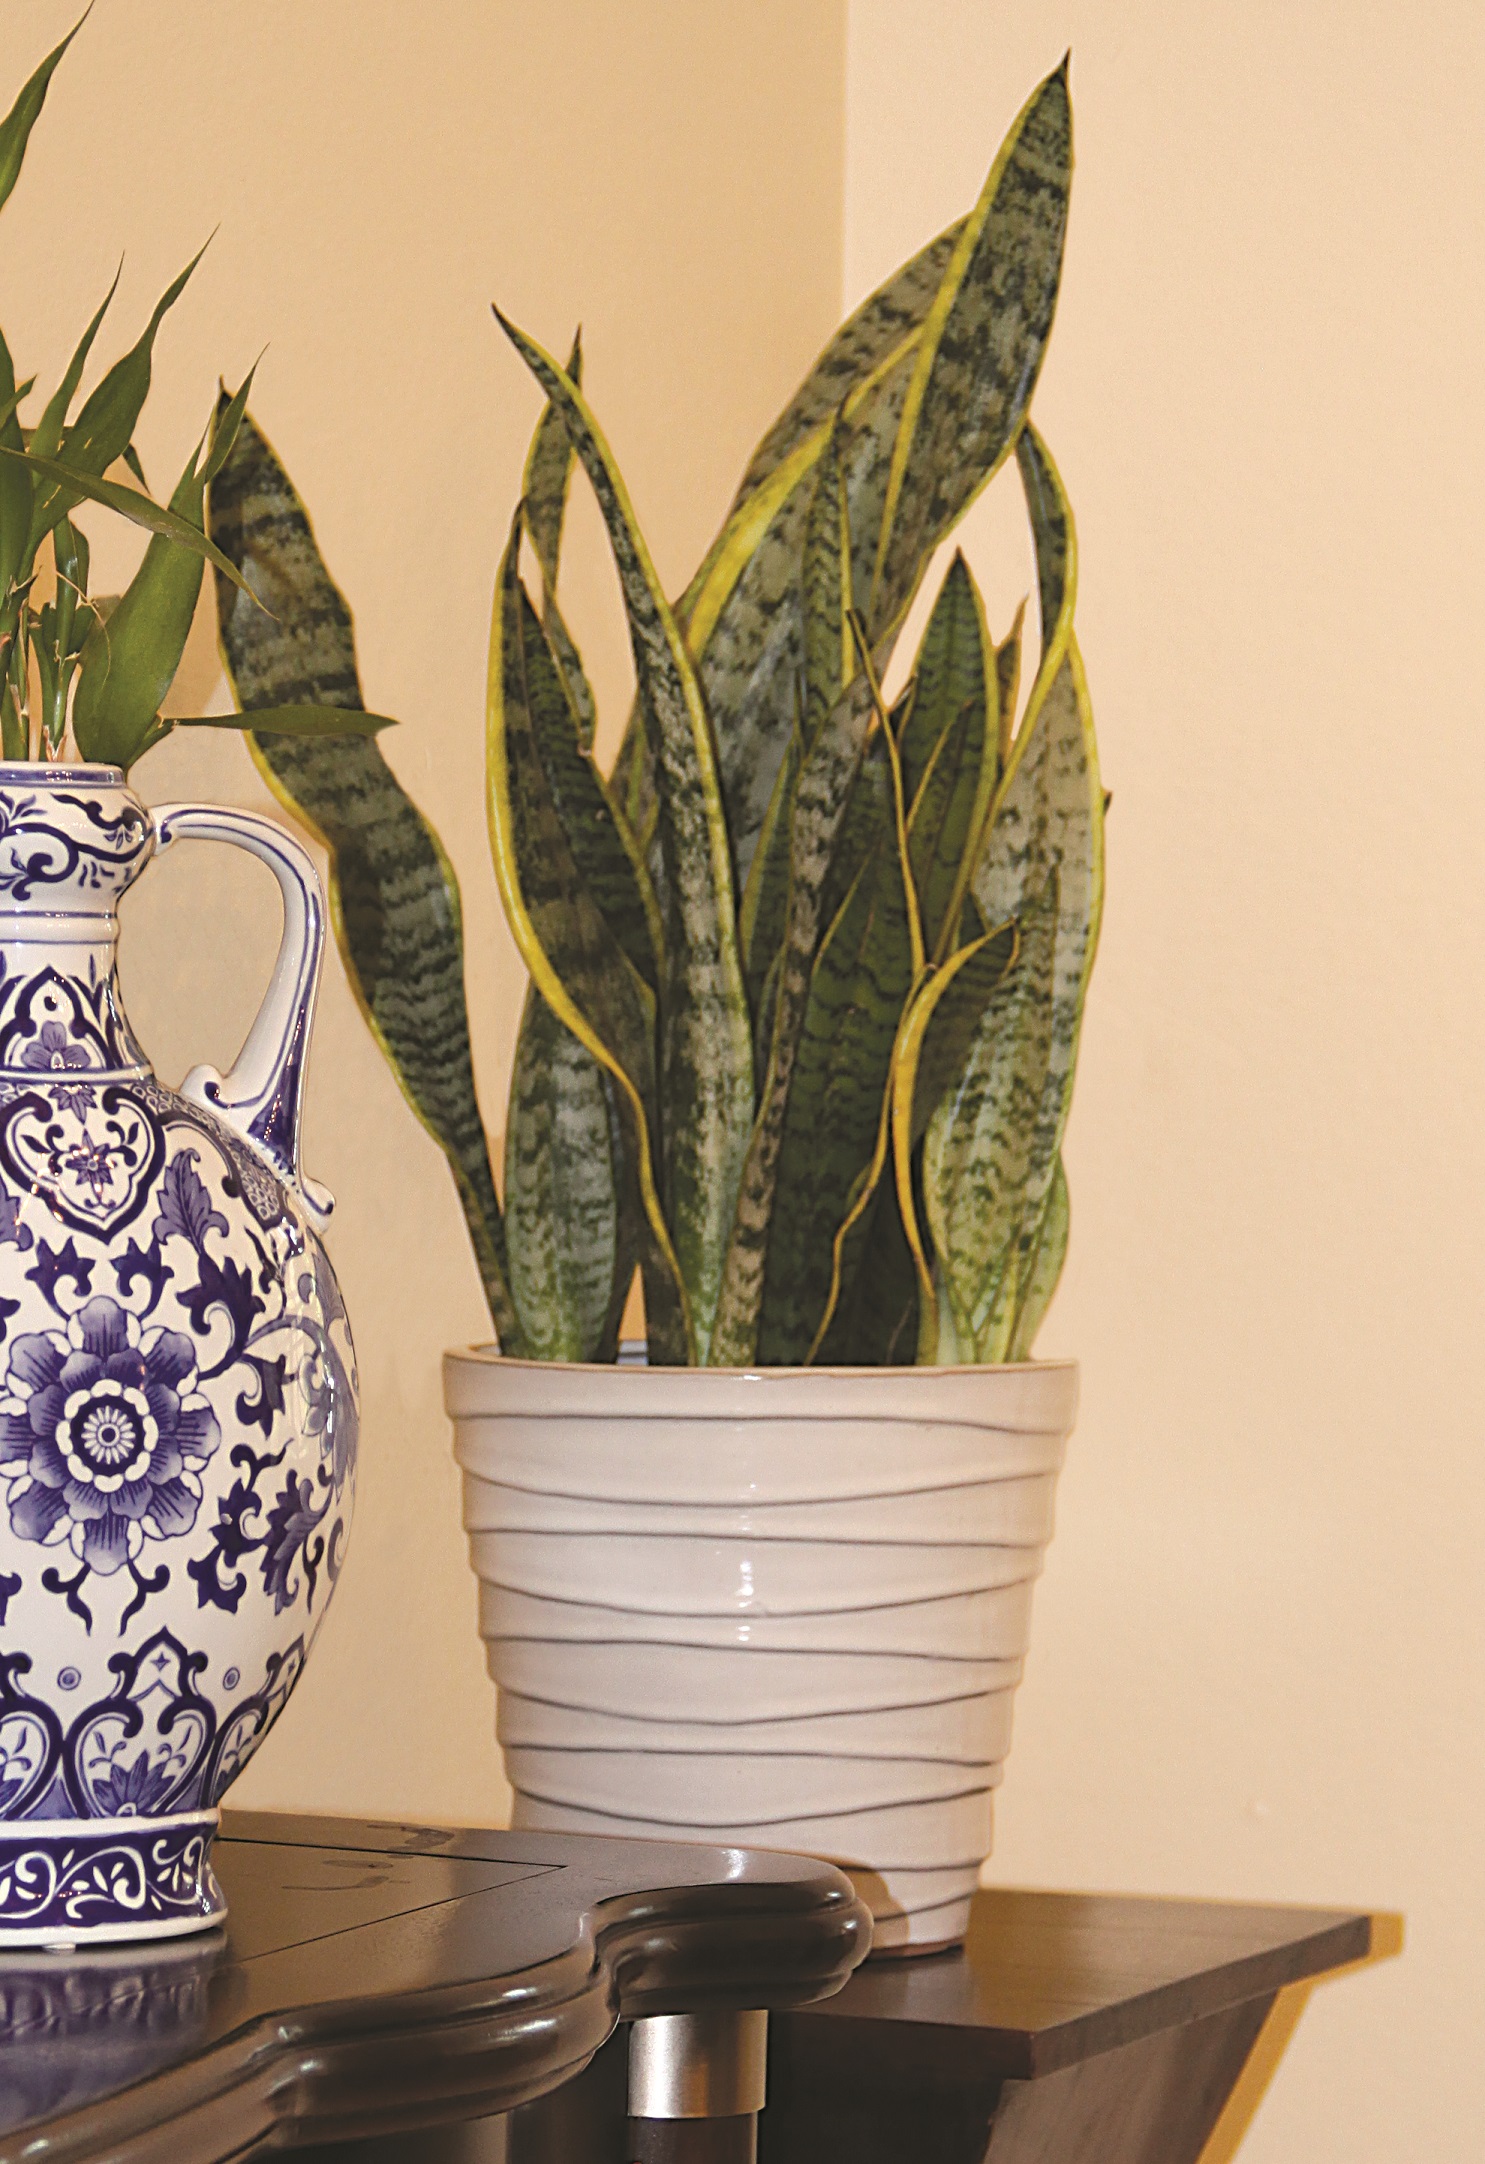 Houseplants help reduce stress and lower blood pressure, transforming an apartment into a personal sanctuary.